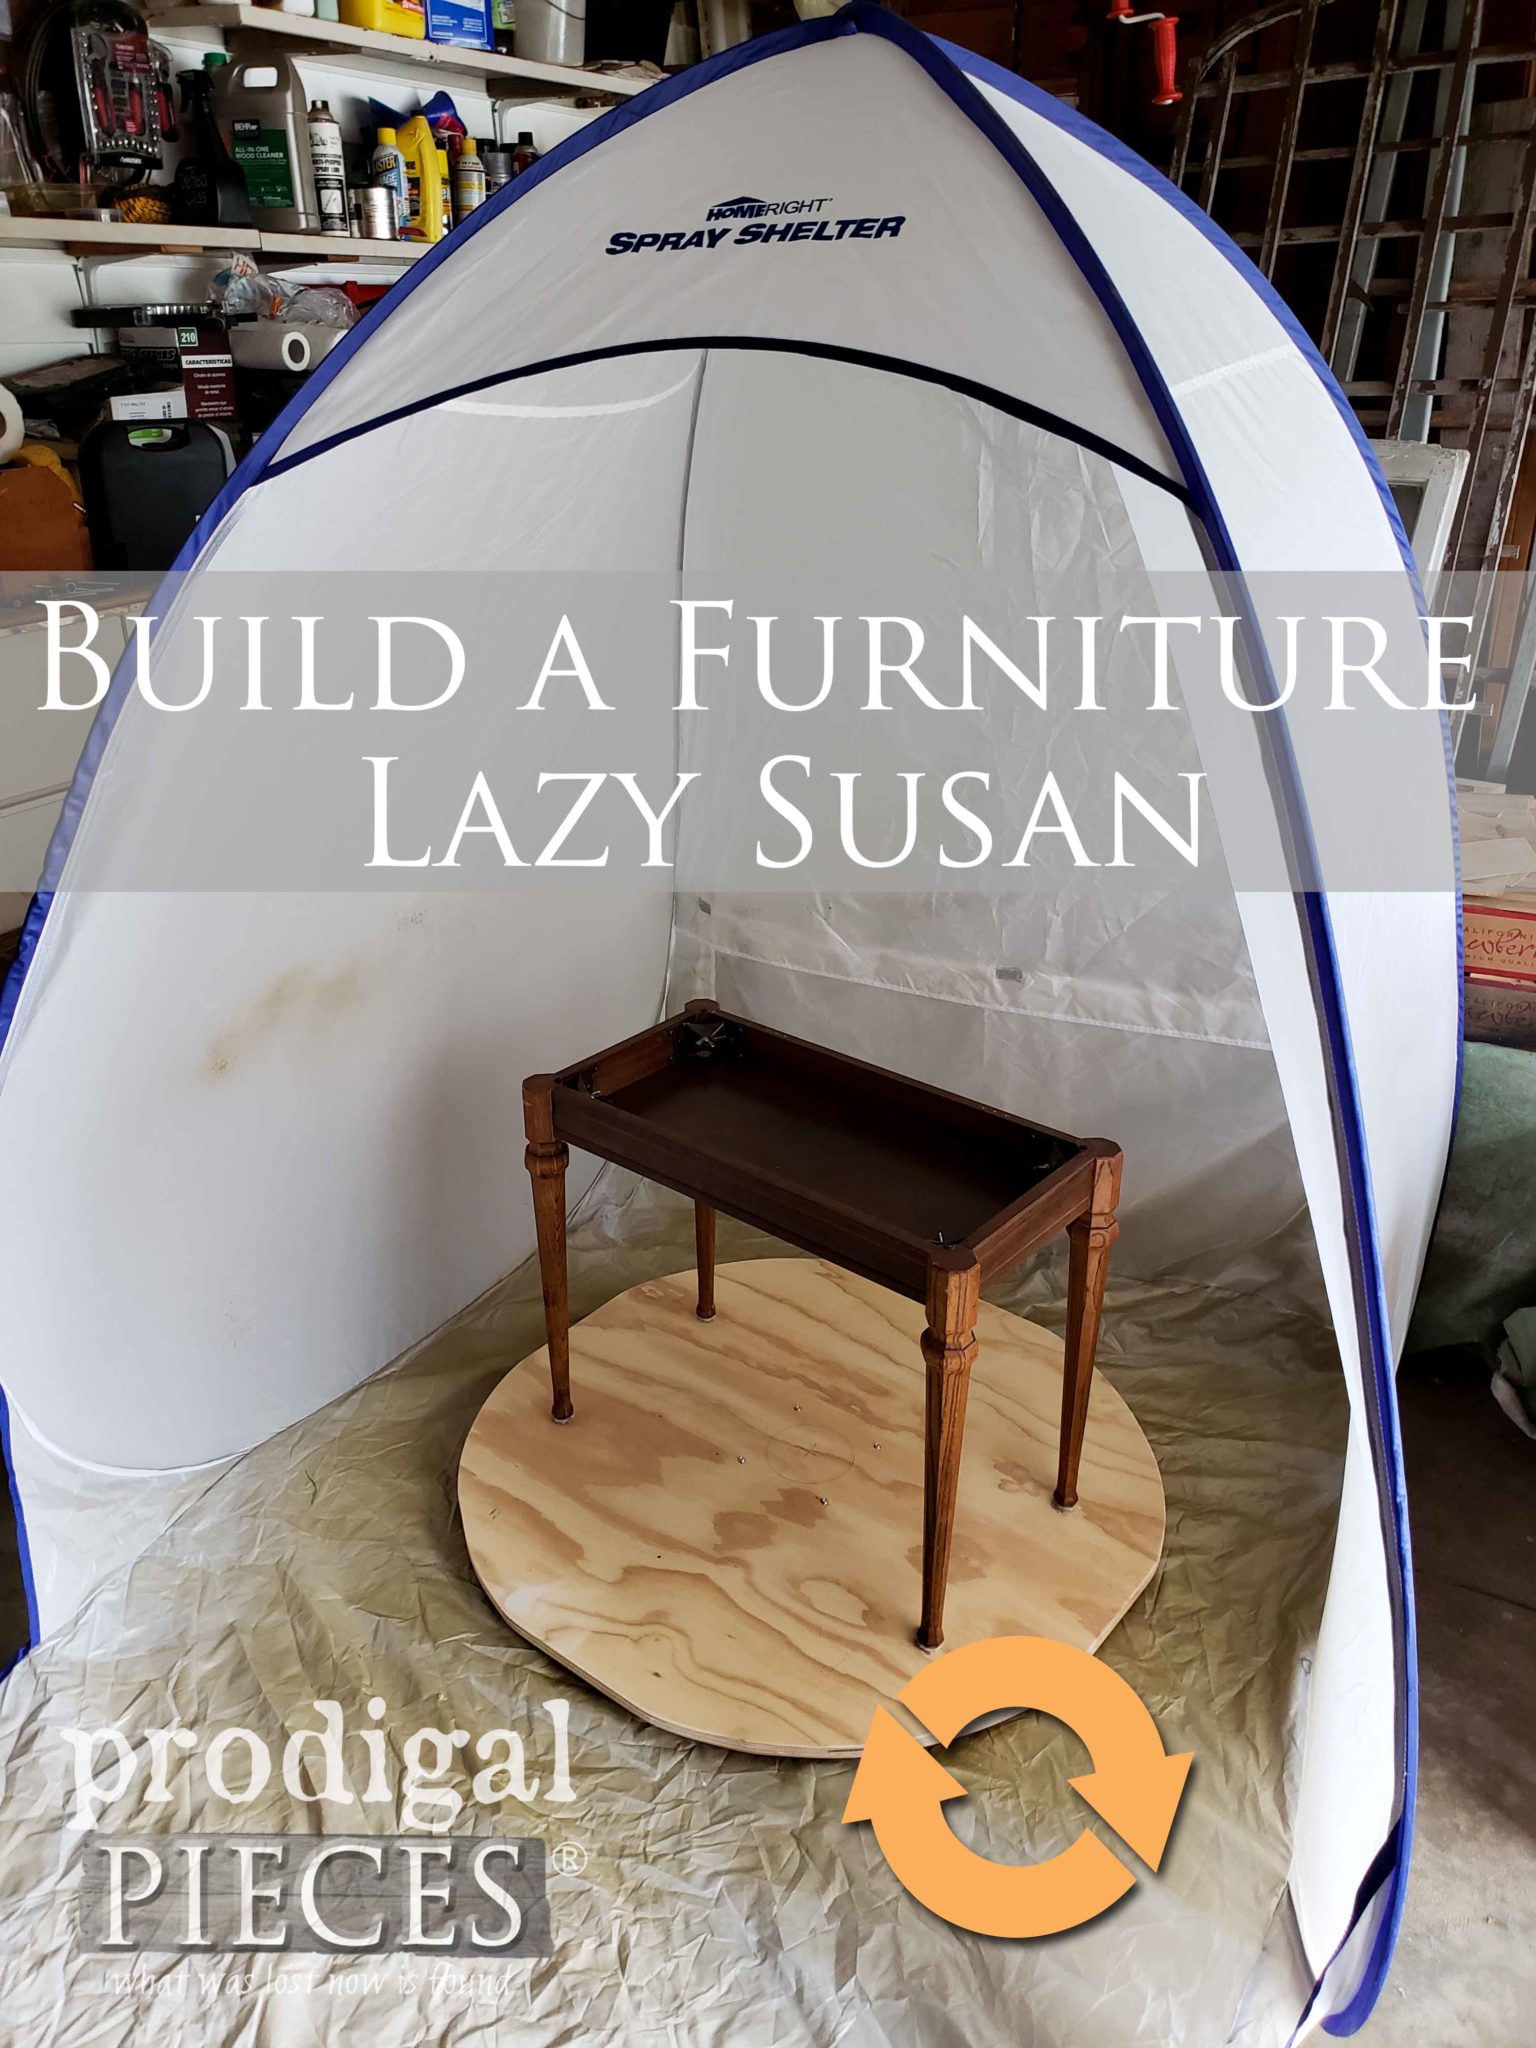 Make your furniture projects a breeze with this simple and affordable DIY Furniture Lazy Susan by Larissa of Prodigal Pieces | prodigalpieces.com #prodigalpieces #diy #handmade #furniture #woodworking #homedecor